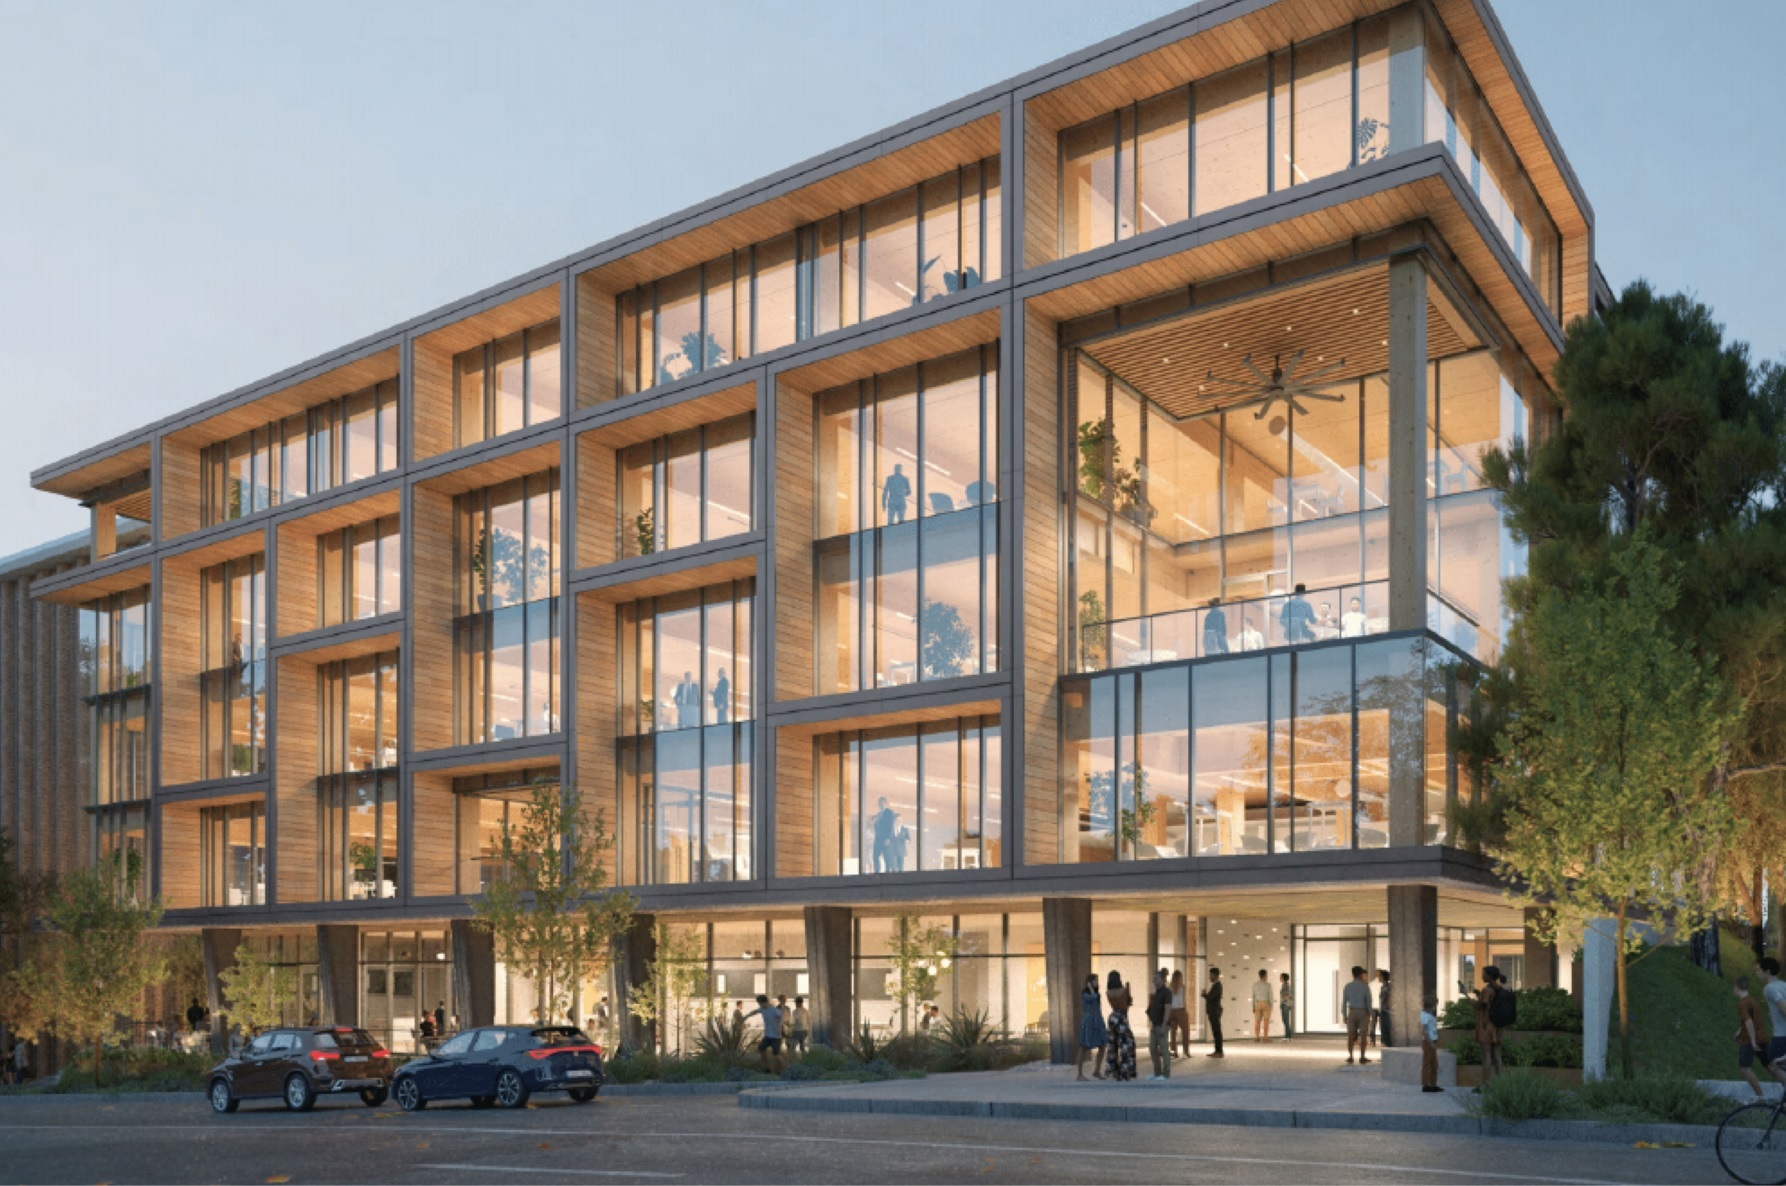 A rendering of the Related Cos.' previously announced plans for the site at 901 S. Congress Ave. in Austin, Texas. (CoStar)